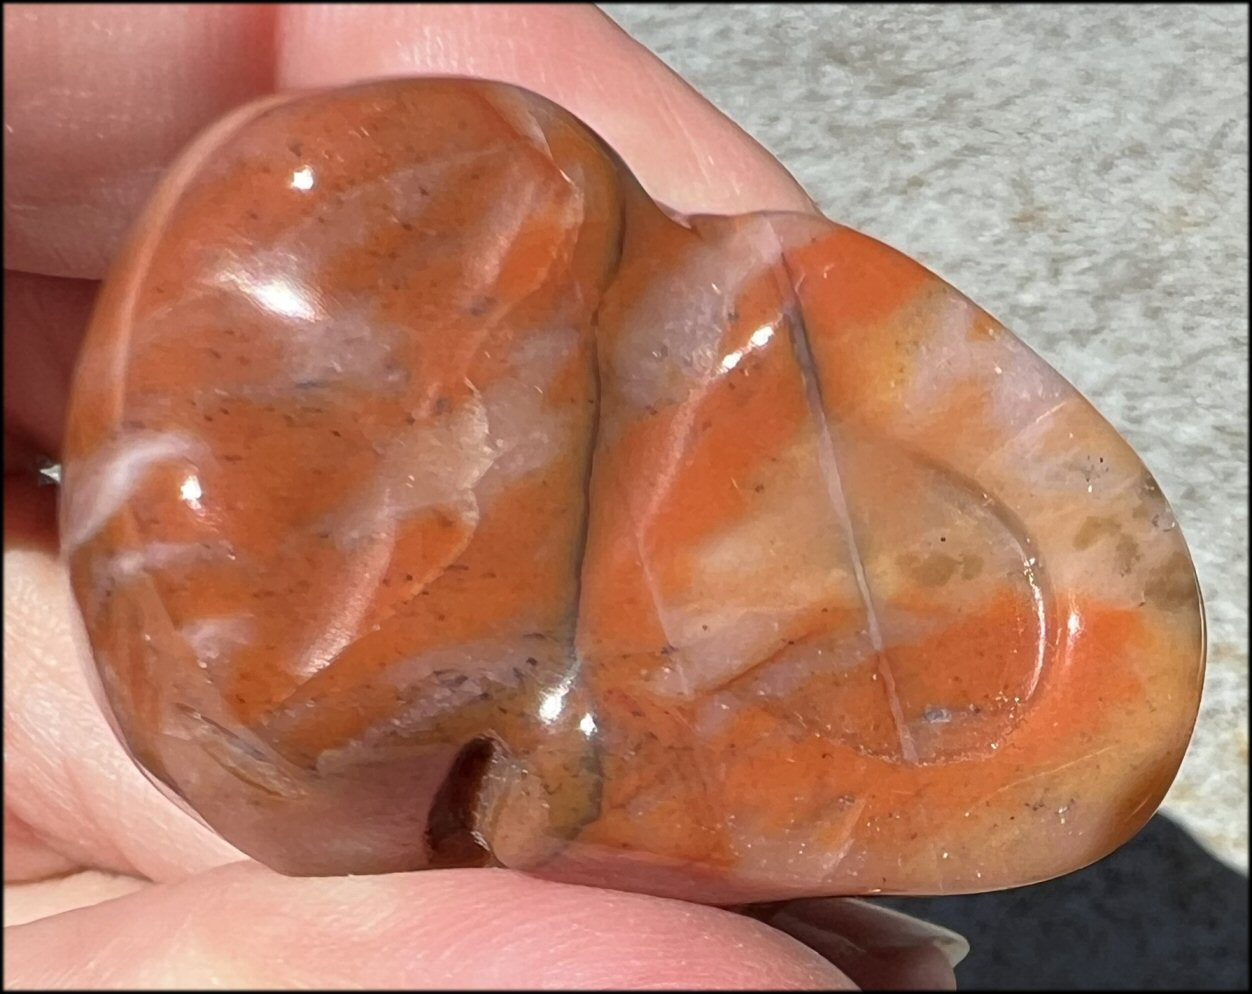 Sunset Jasper Crystal Skull - Re-focus, Mental Clarity - with Synergy 4+ years